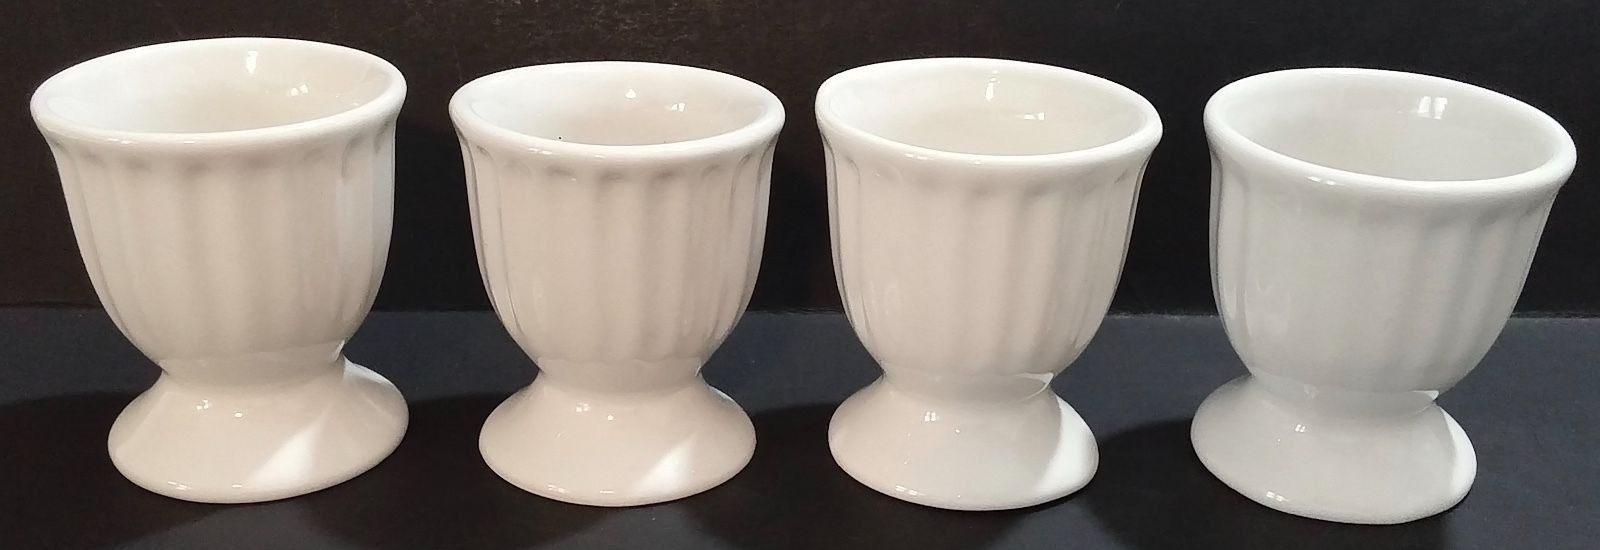 20 Awesome Pier 1 Owl Vase 2024 free download pier 1 owl vase of set of 4 pier 1 imports white ceramic ribbed egg cups china pertaining to 1 of 5only 1 available